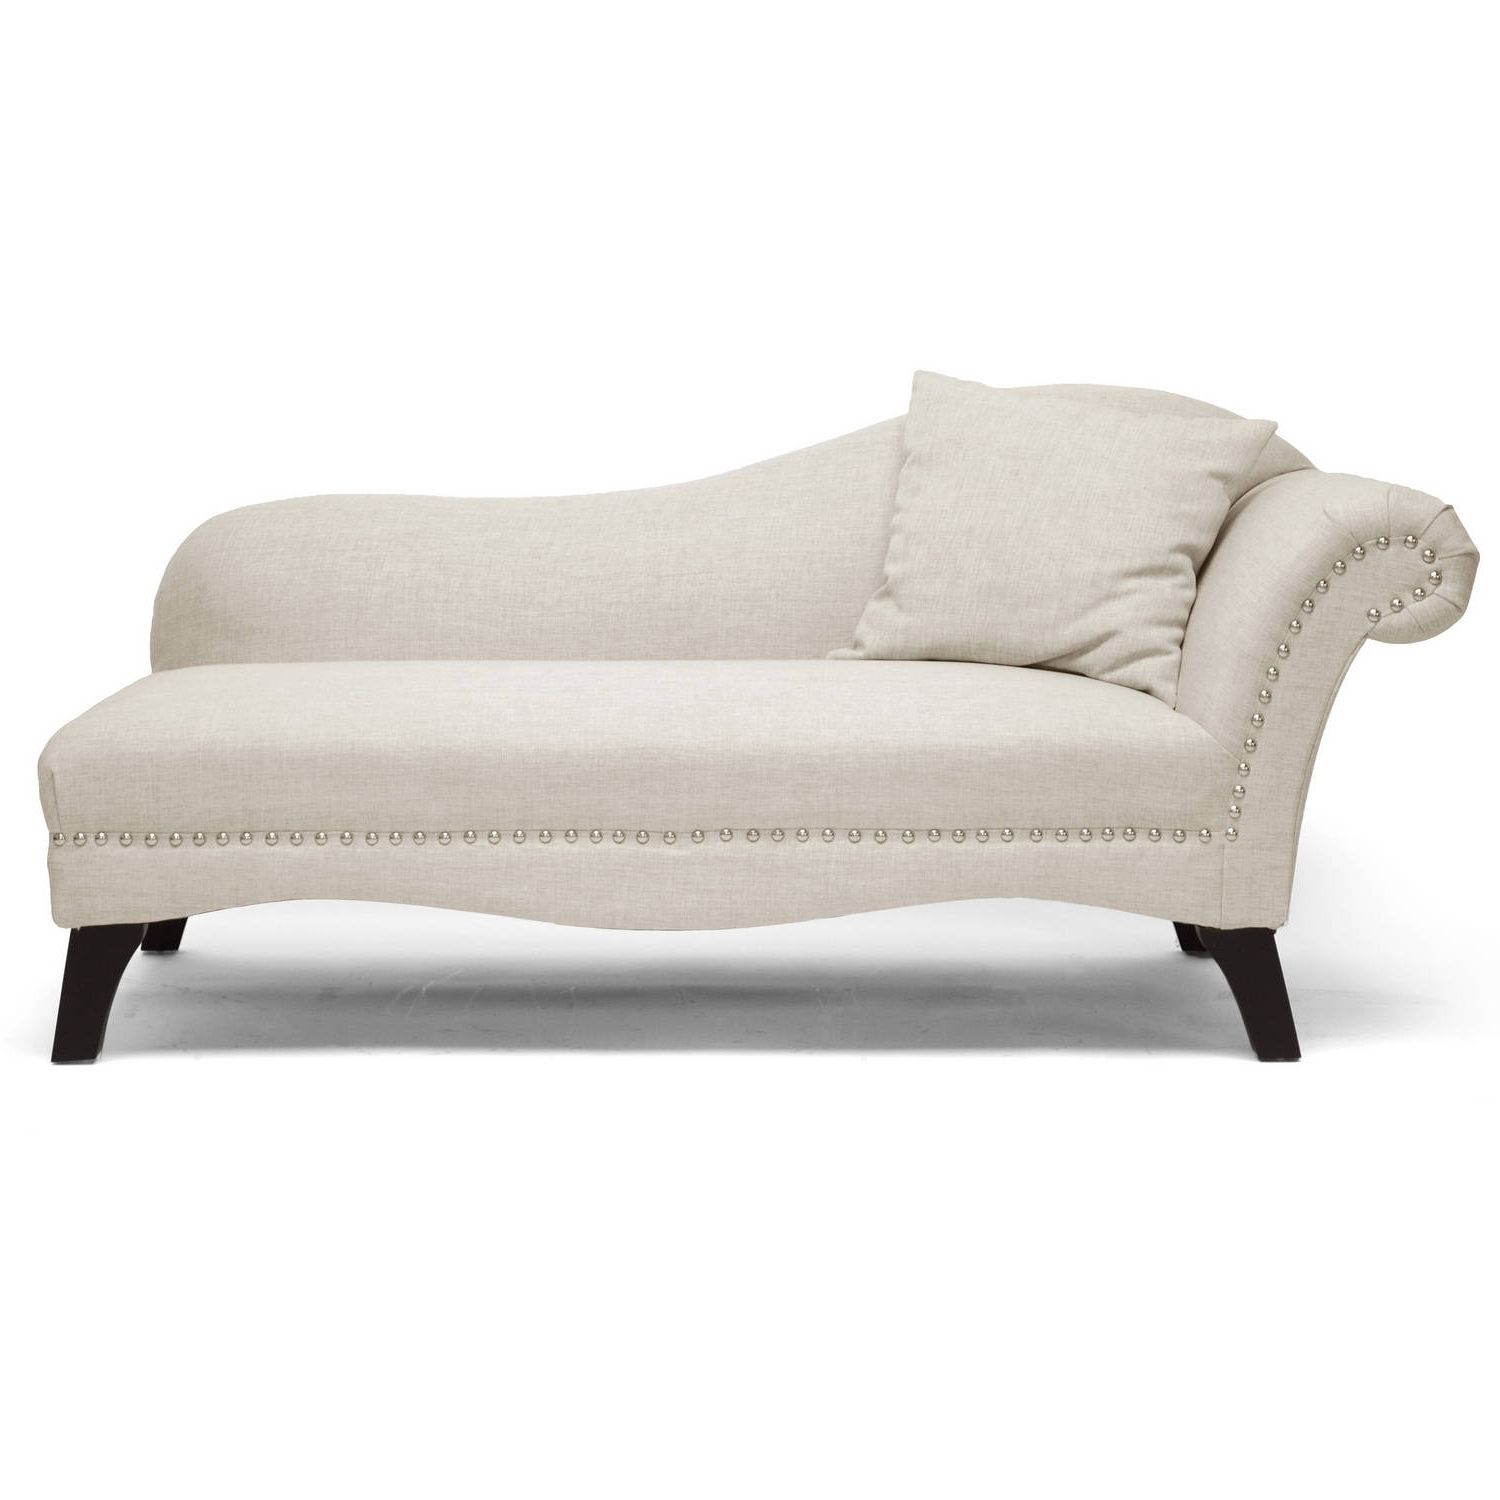 Tufted Chaise Lounges Throughout 2017 Chaise Lounges – Walmart (View 13 of 15)